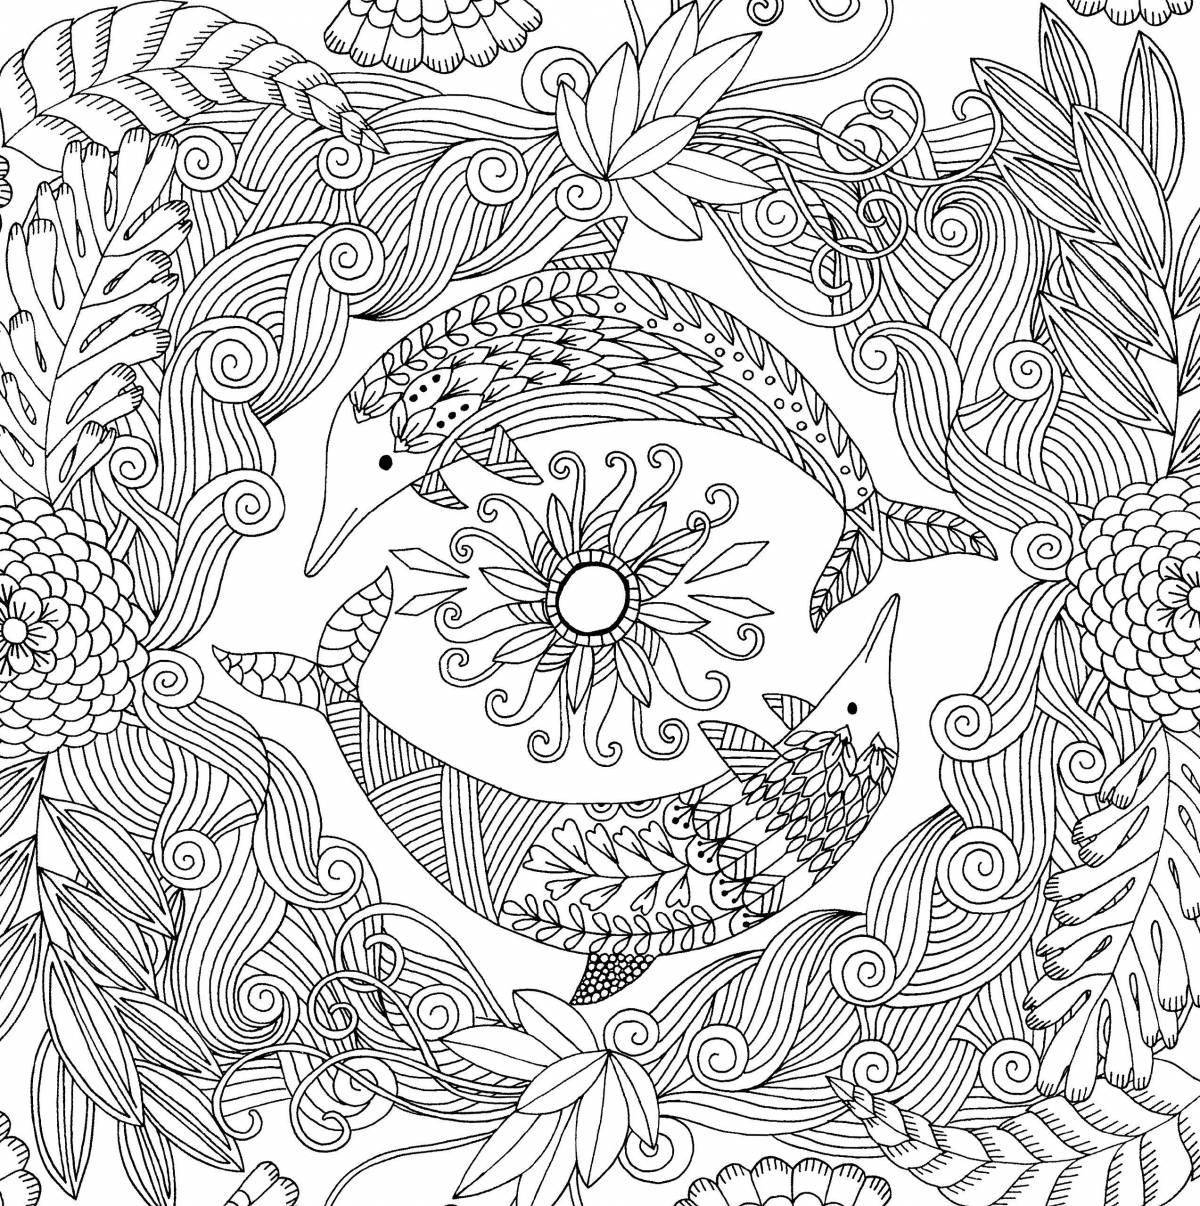 Creative coloring book for meditation and relaxation